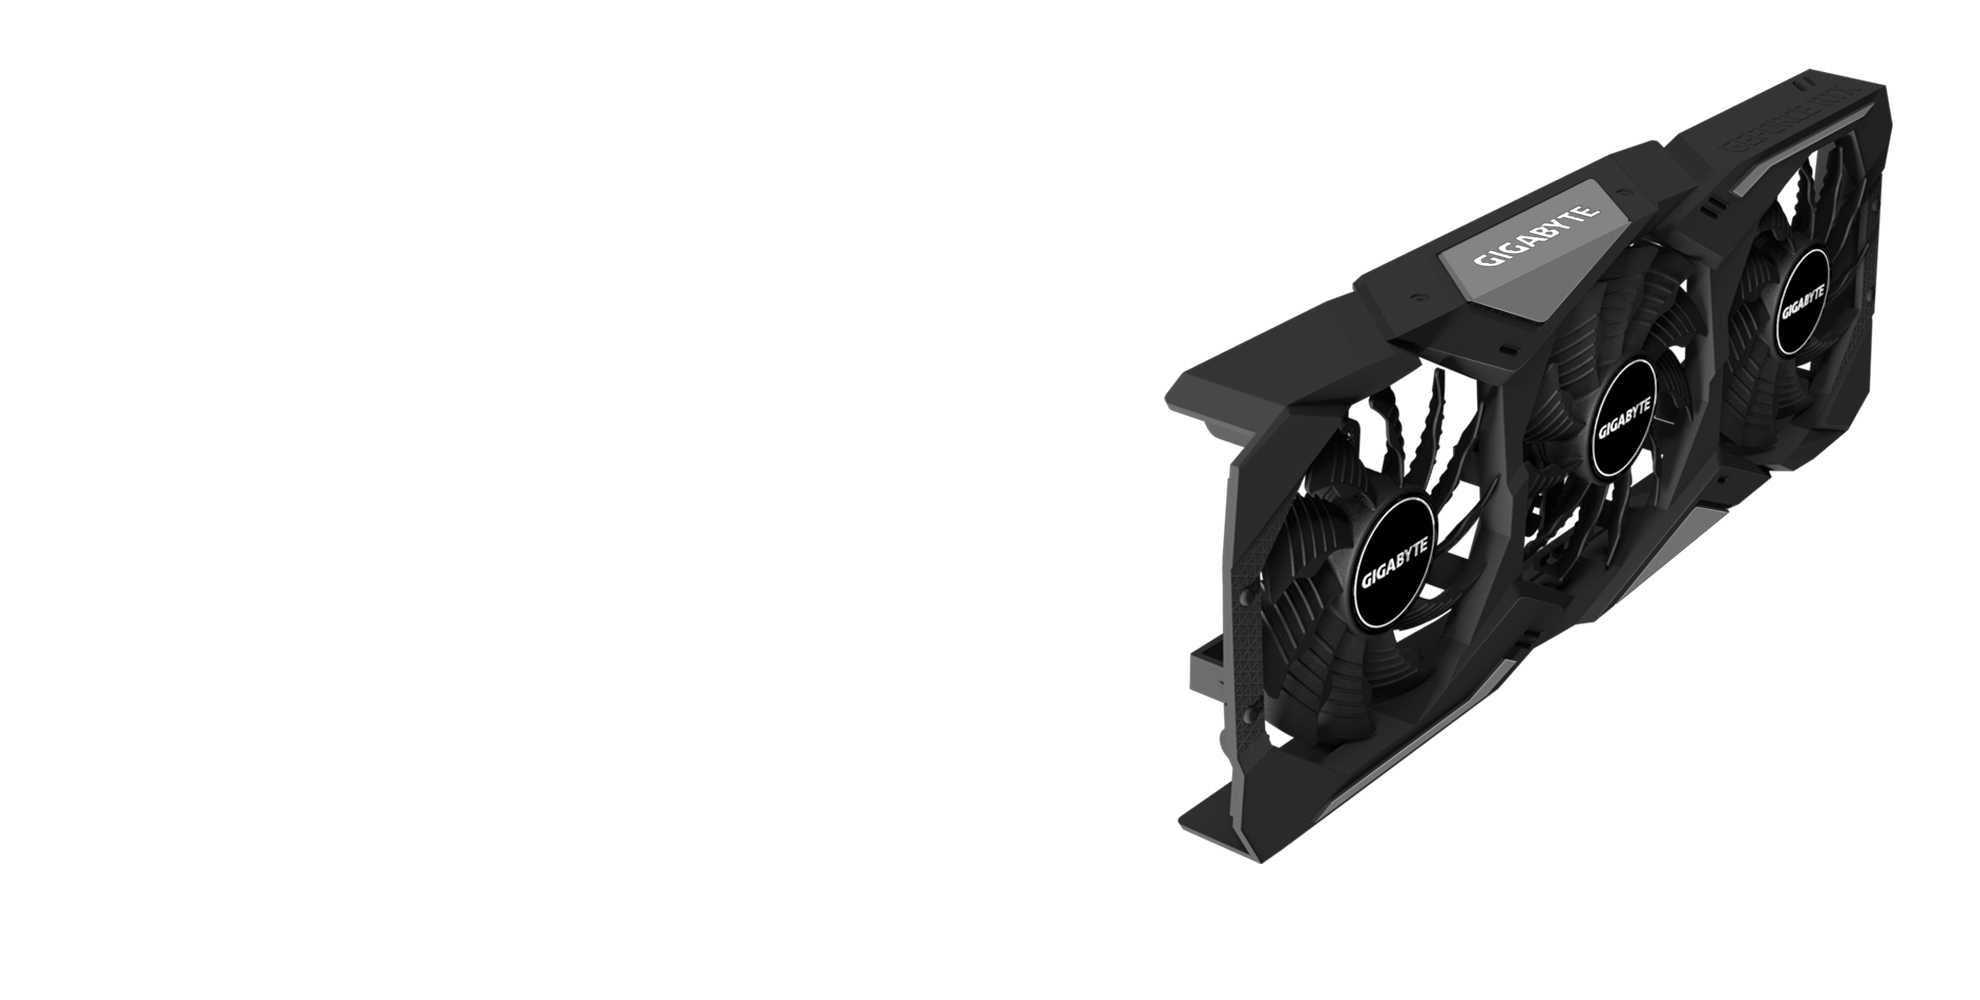 GeForce® RTX 2080 SUPER™ GAMING OC 8G (rev. 2.0) Key Features 